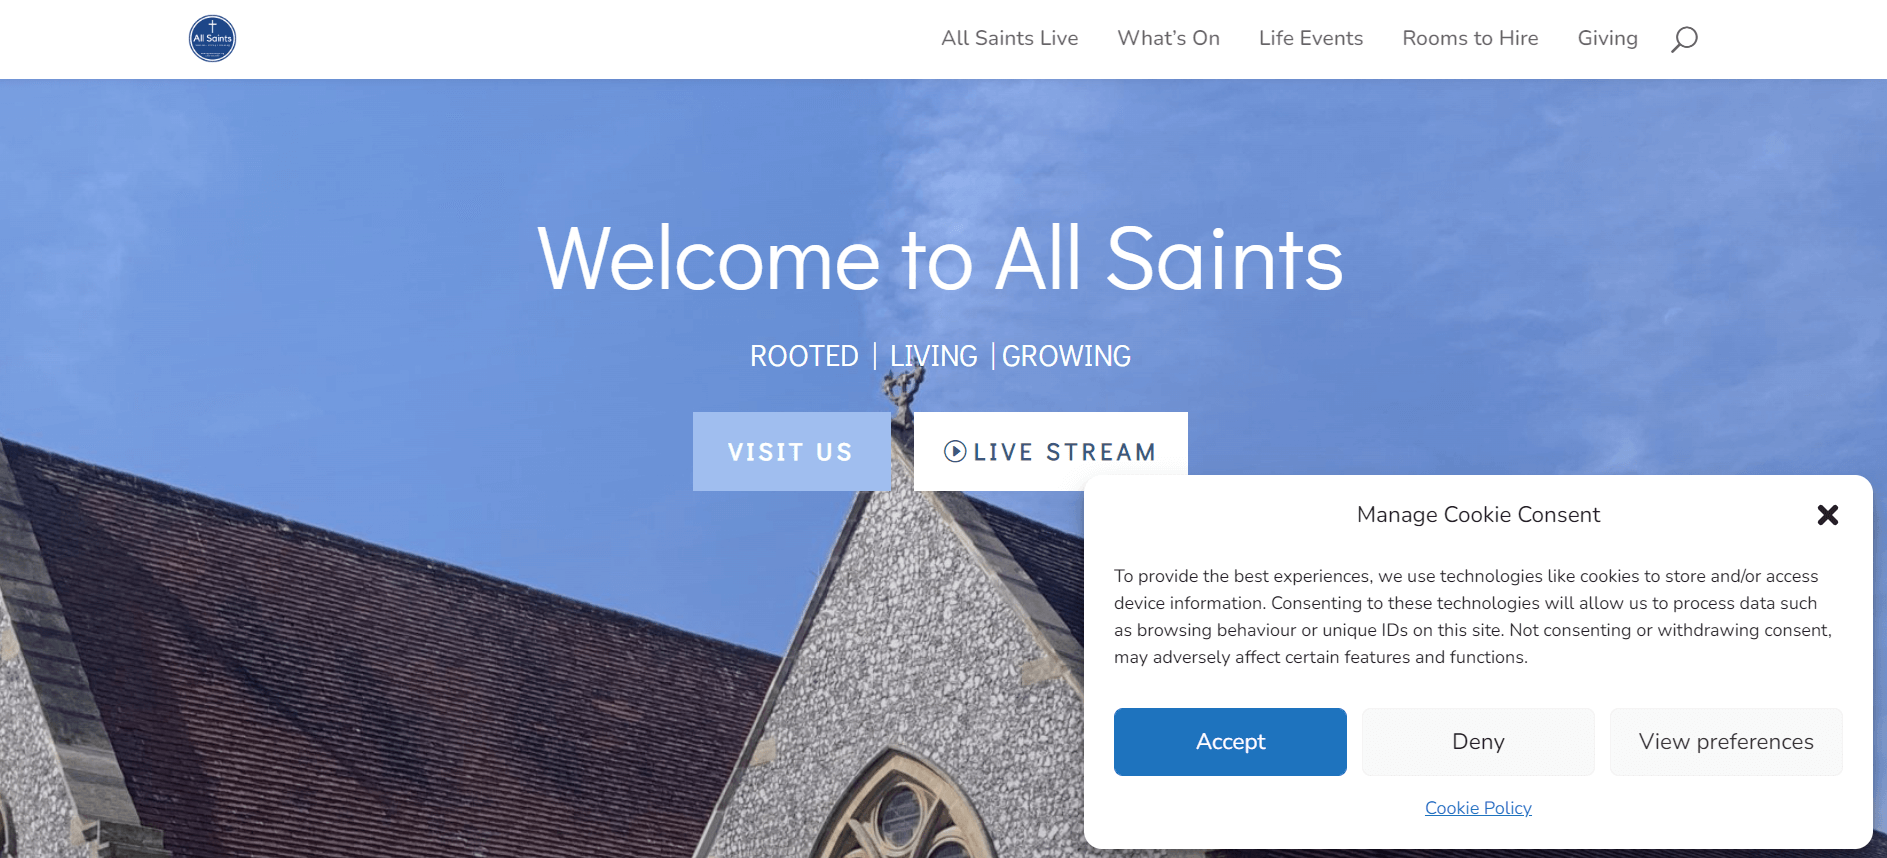 The new All Saints website designed by Daily Bread Consultancy